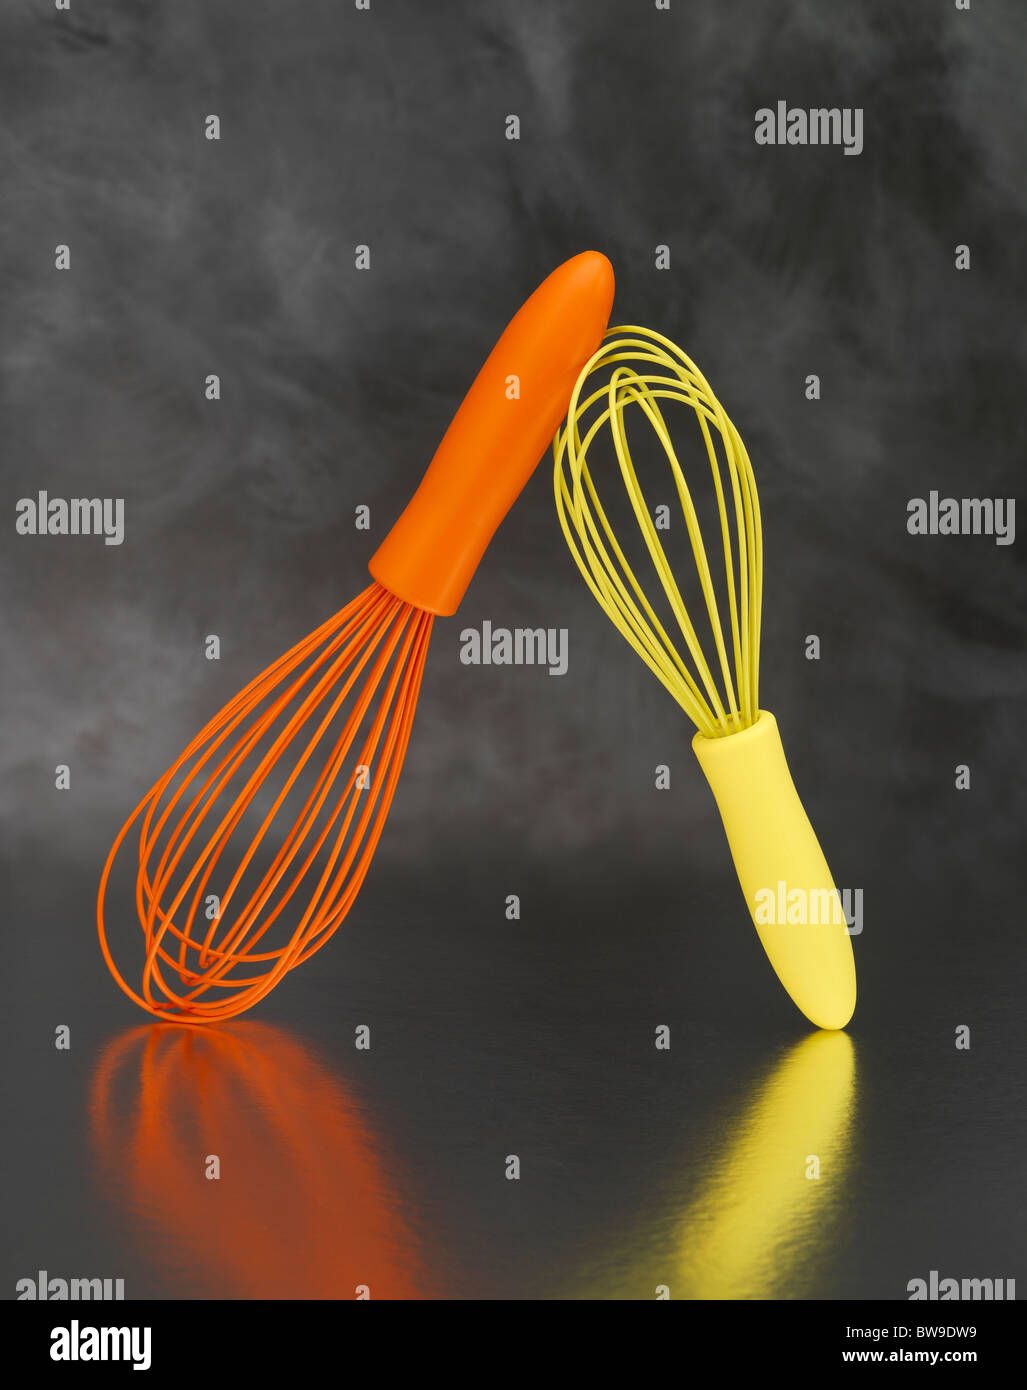 https://c8.alamy.com/comp/BW9DW9/an-orange-and-a-yellow-egg-whisk-on-a-grey-background-BW9DW9.jpg